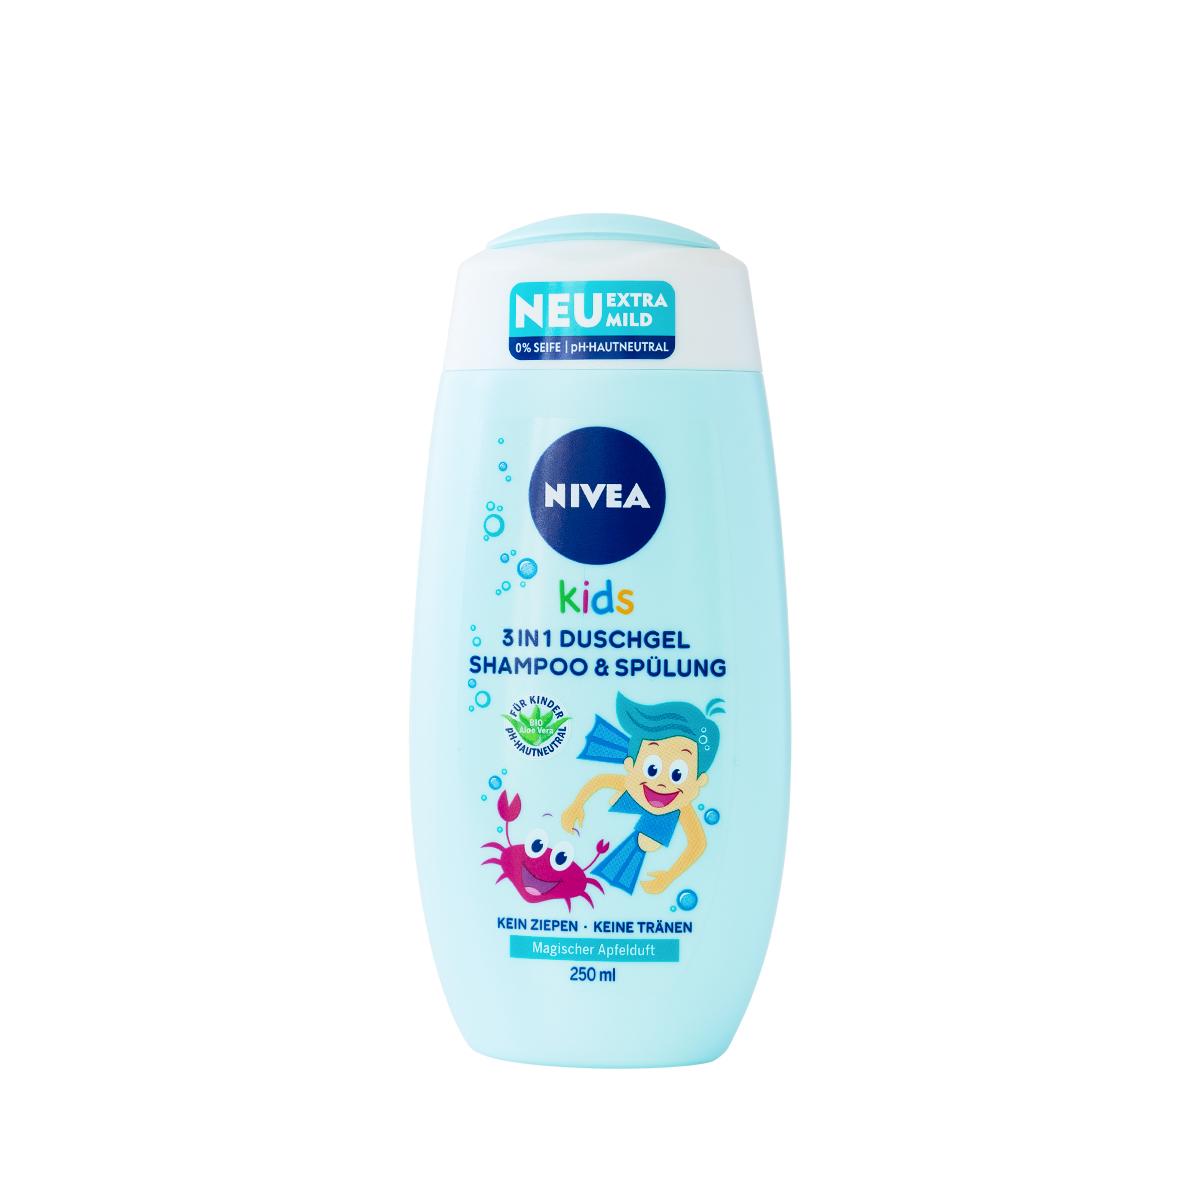 Primary image of Kids 3 in 1 Apple Shower Care